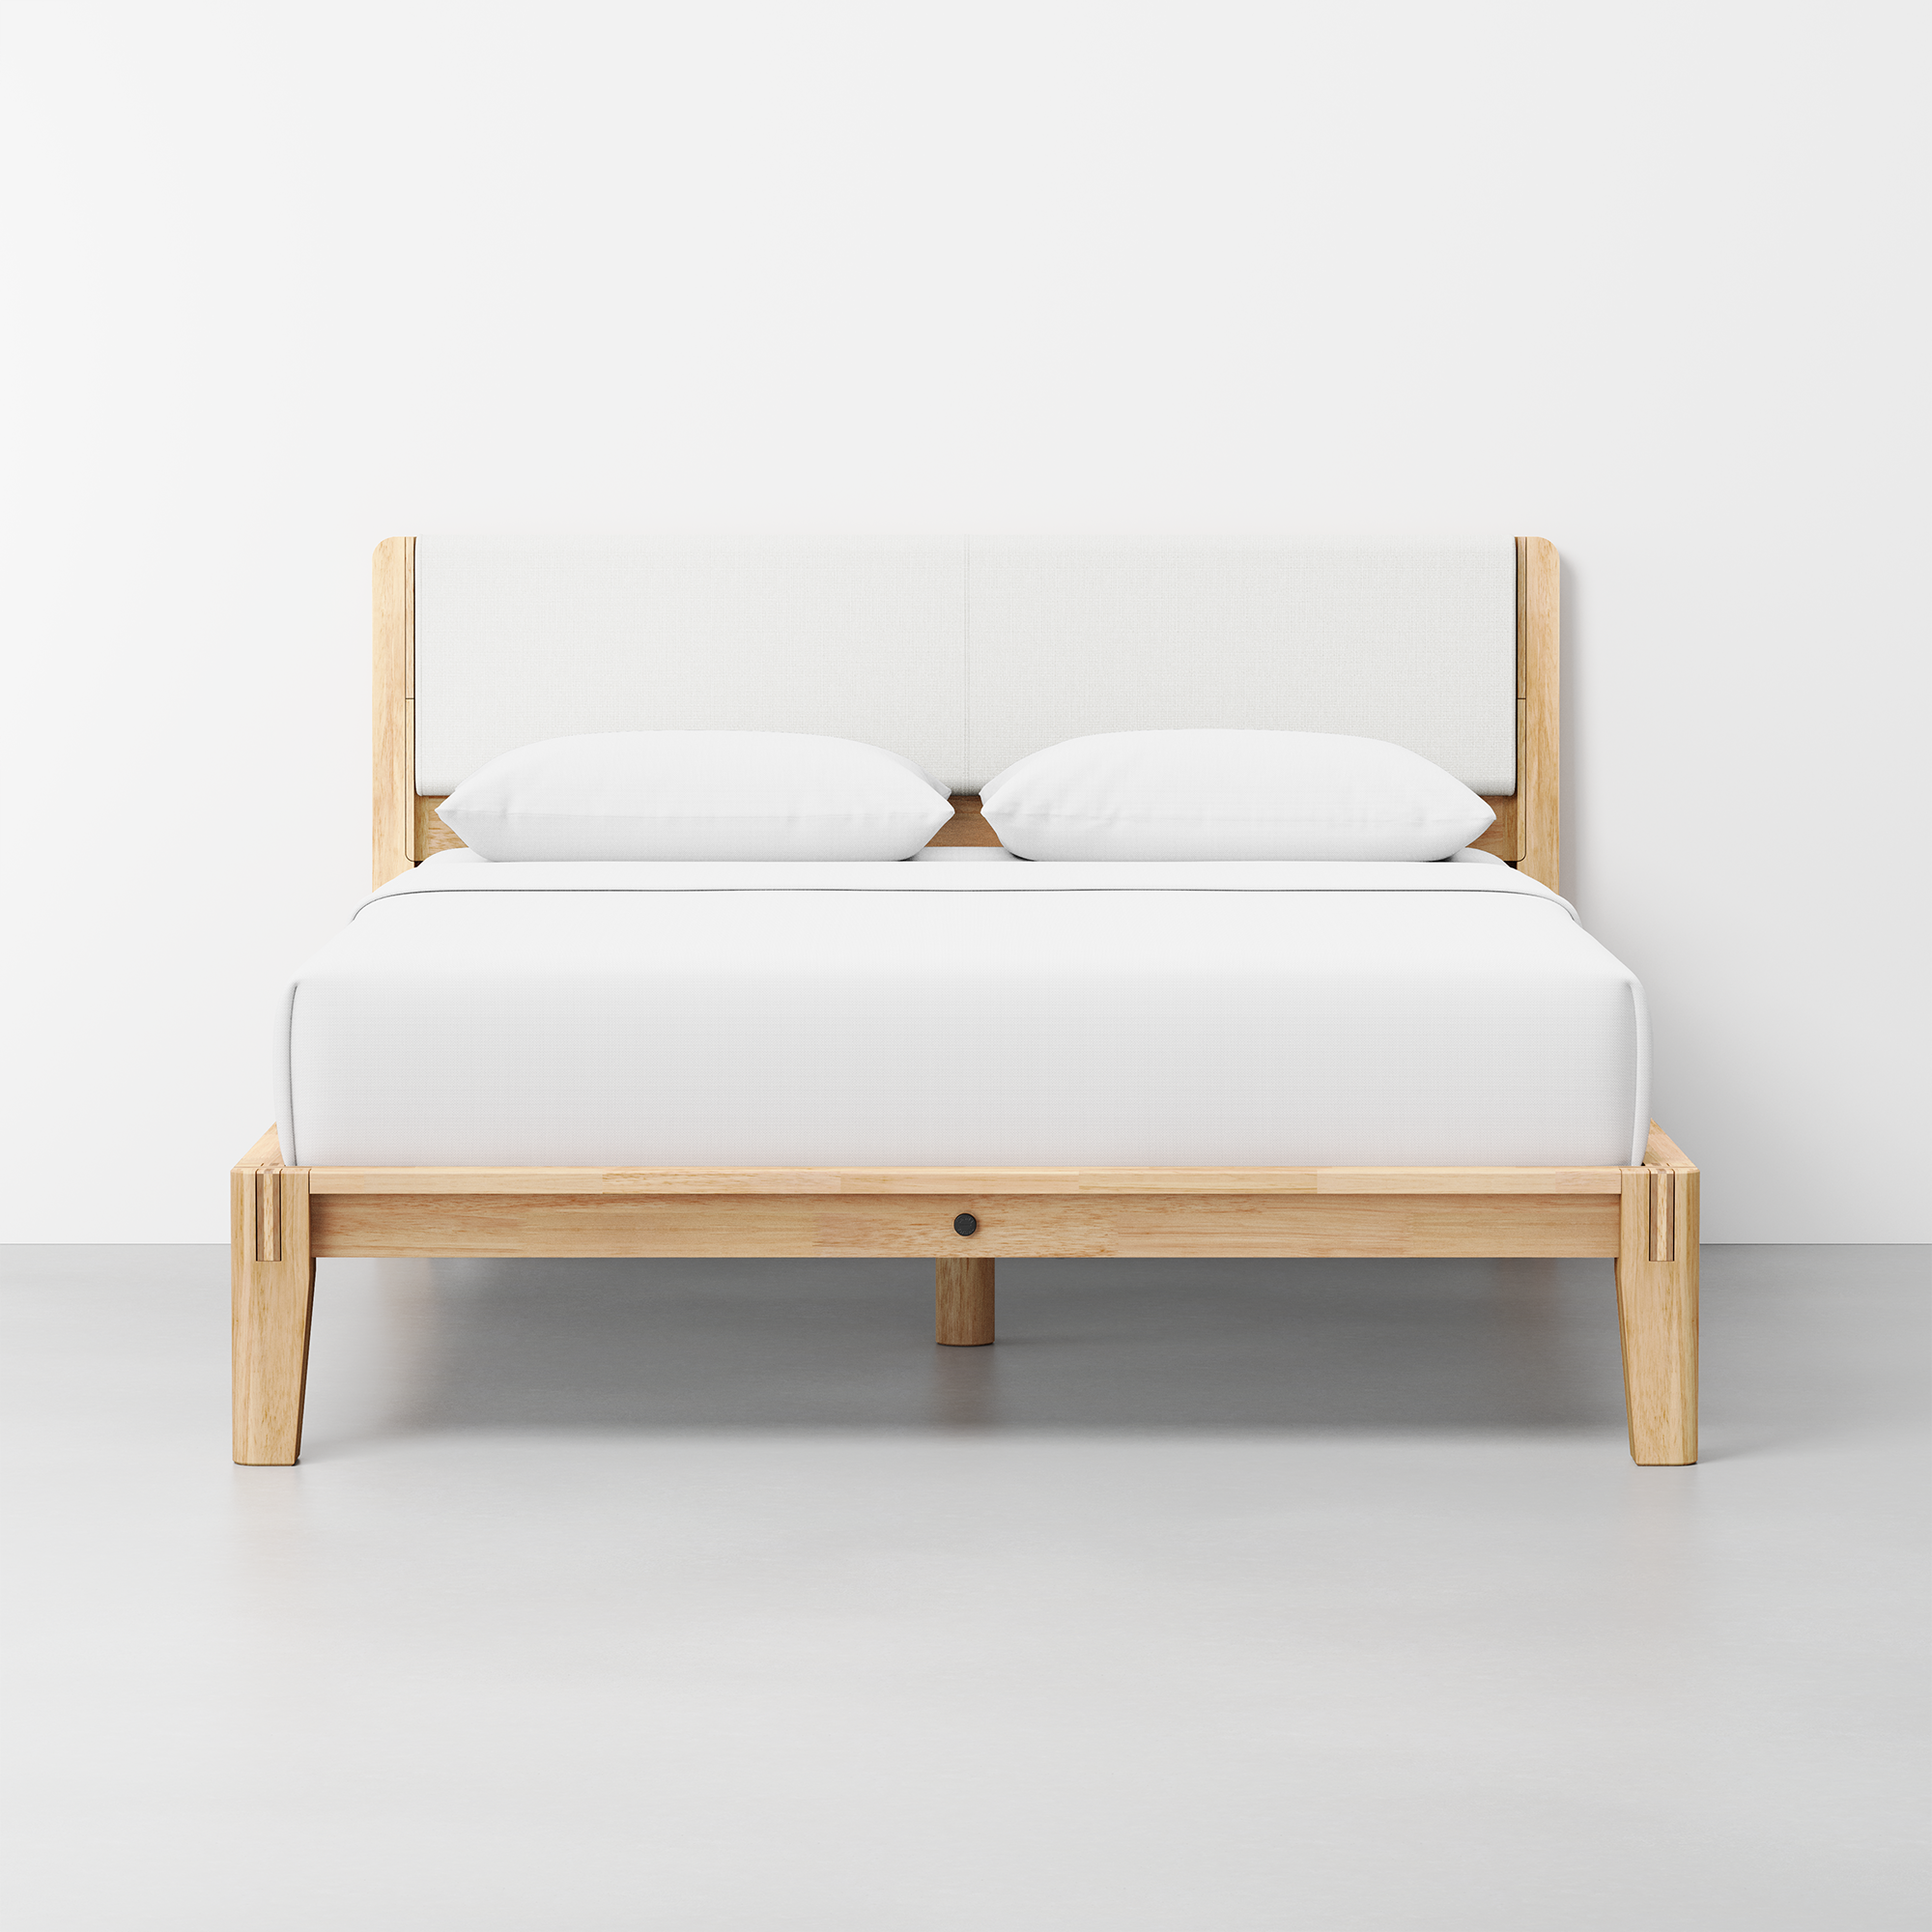 The Bed (Natural / HB Cushion Light Linen) - Render - Front